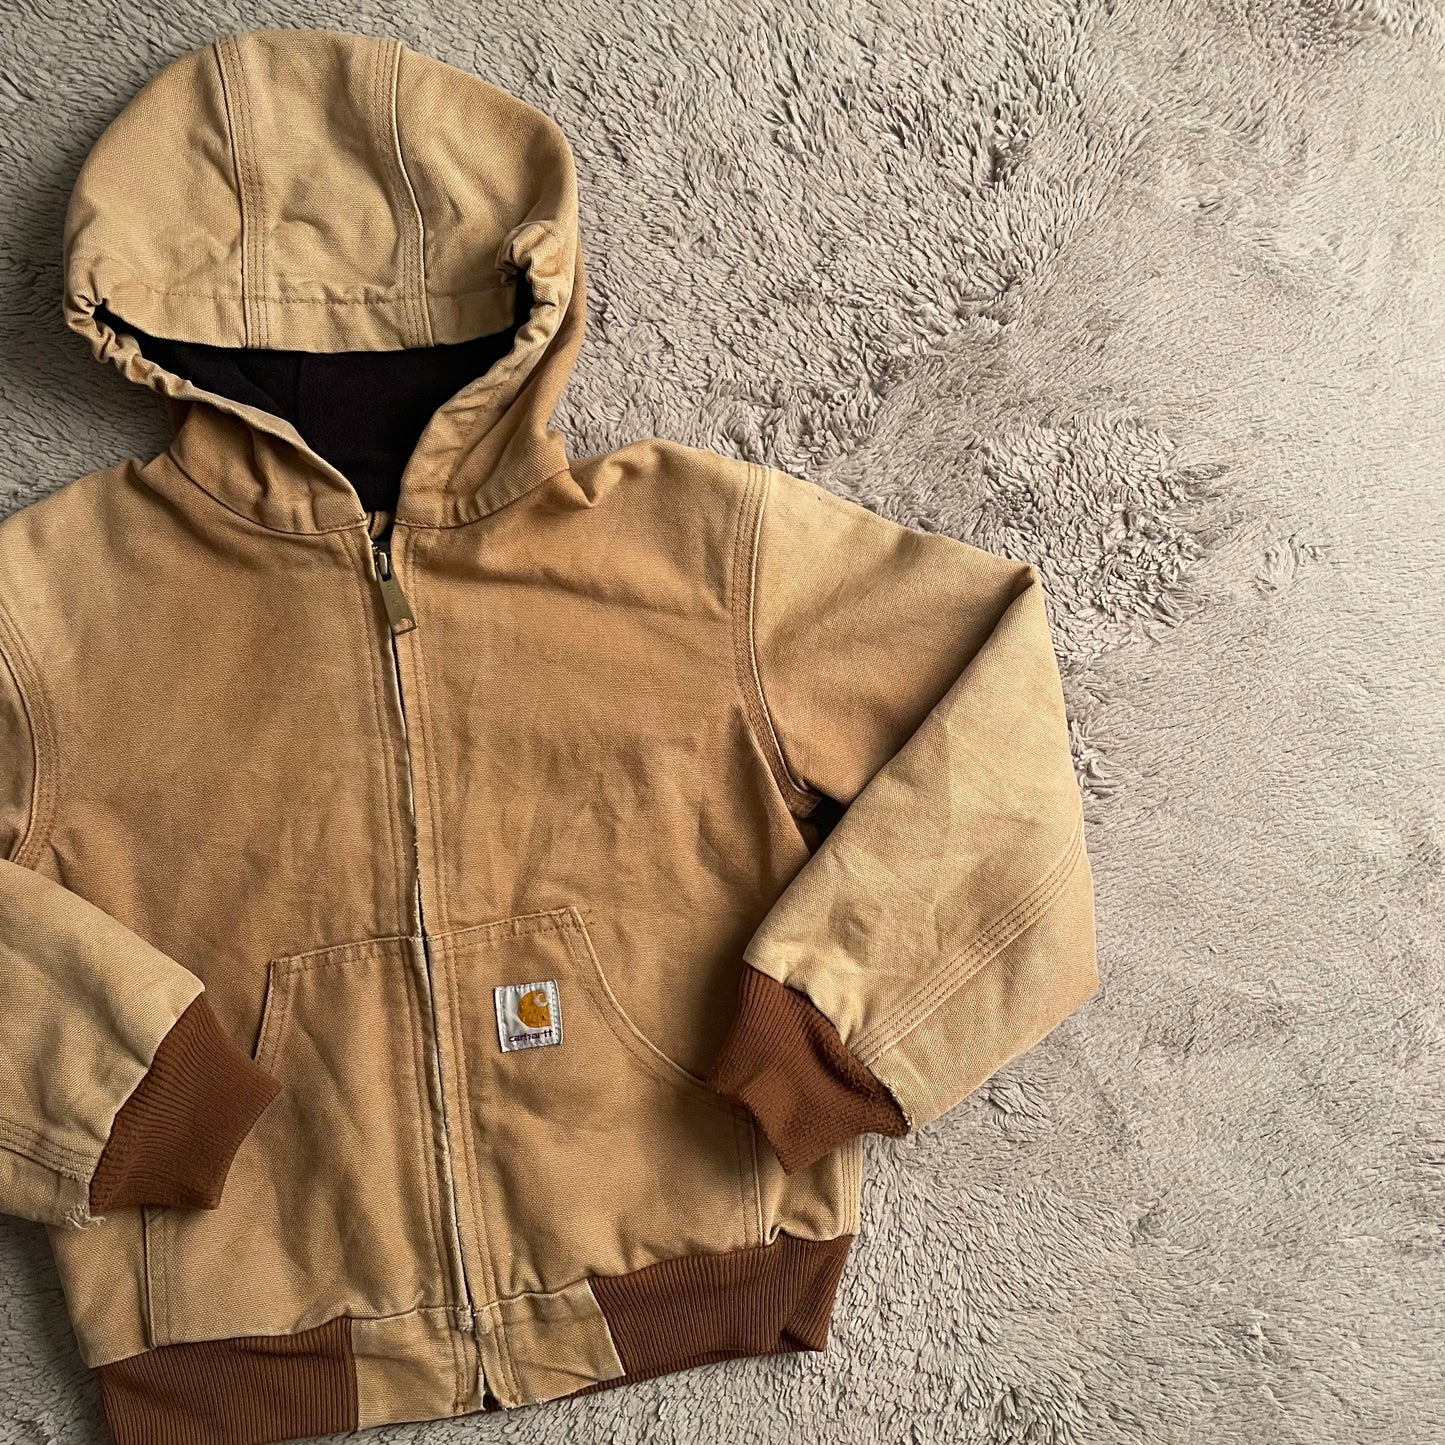 Carhartt Youth Distressed Jacket (Kids Size M/8)